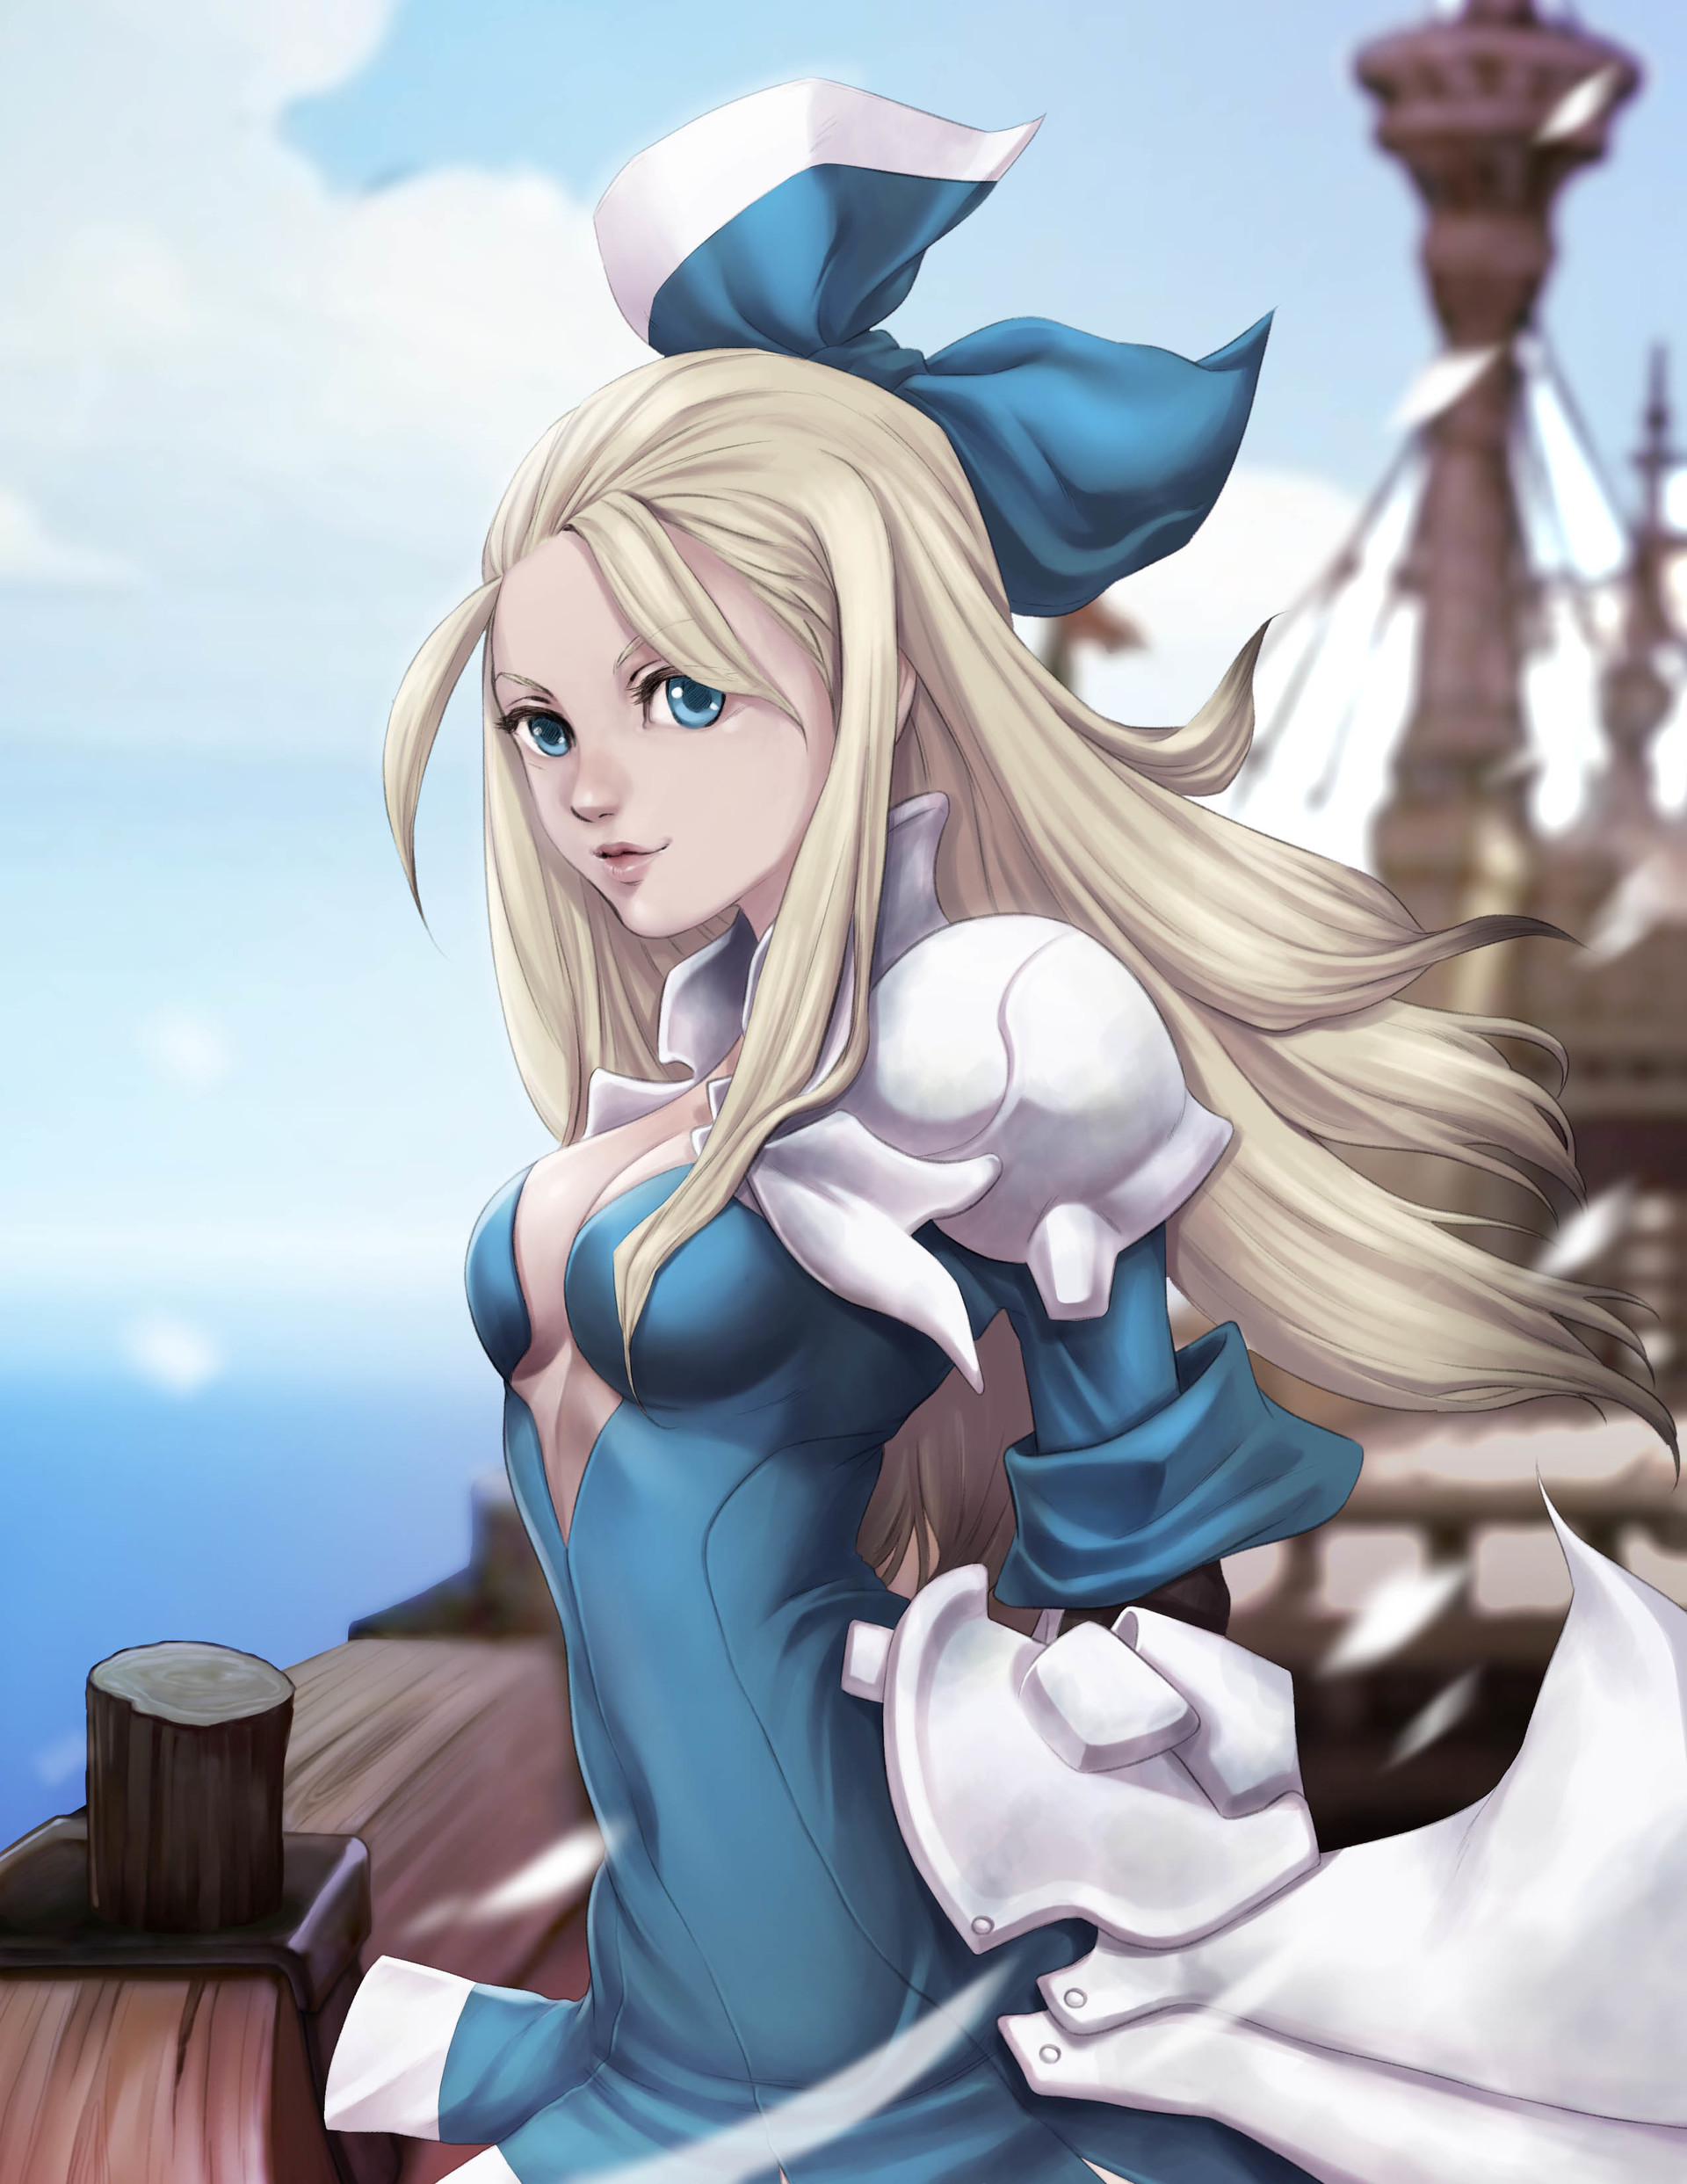 Cheyenne QO - Bravely Second's Edea Lee (with a bit of process)